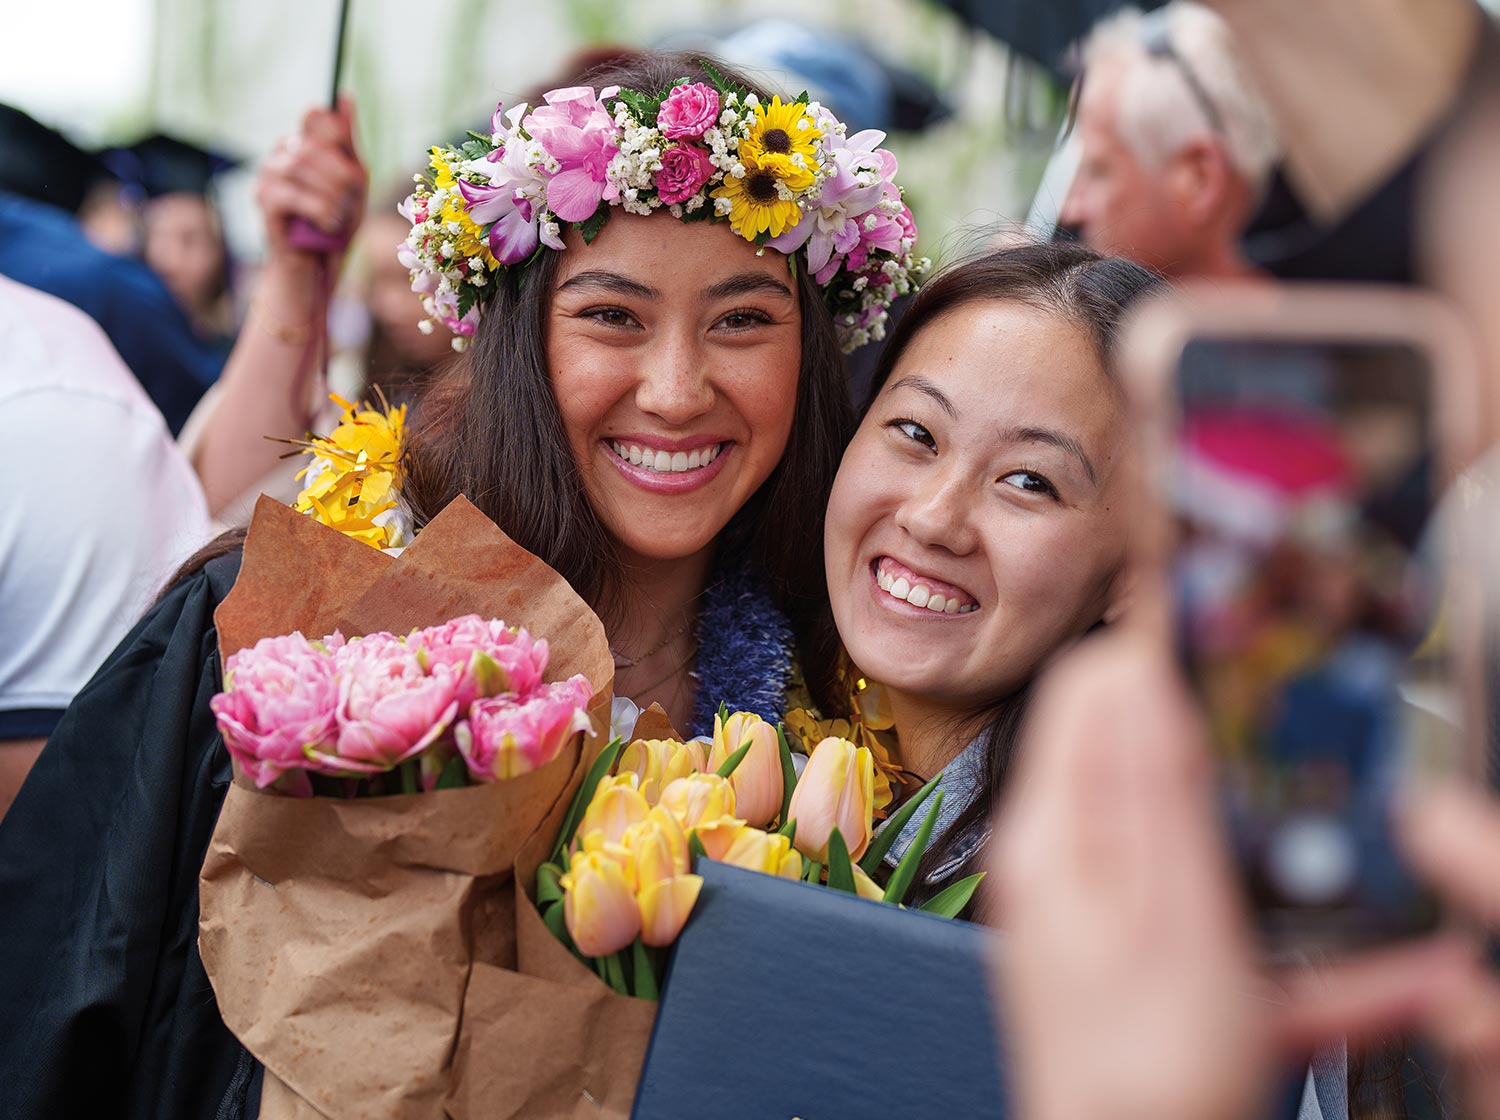 a young woman wearing a gown and a crown of pink and yellow flowers and holding multiple bouquets smiles while taking a photo with another smiling woman